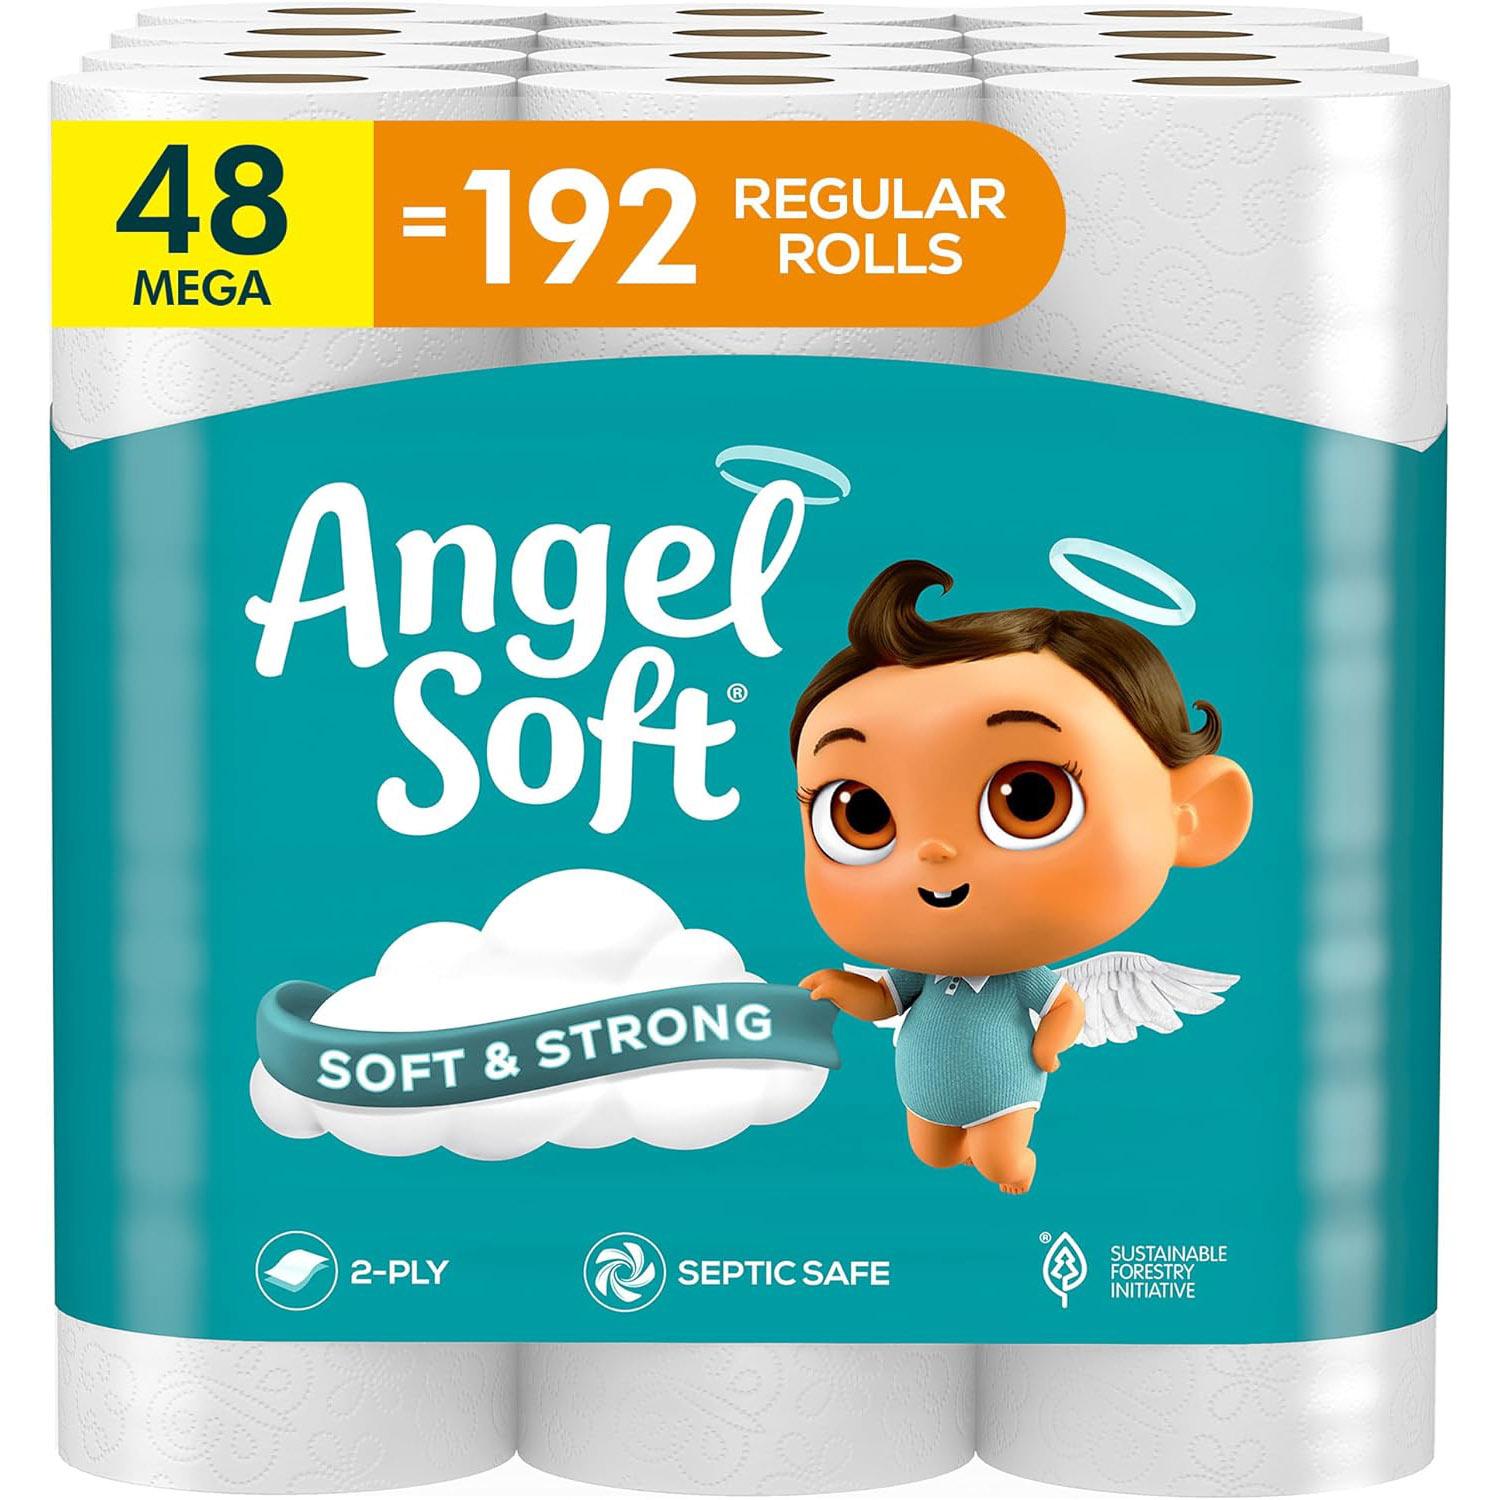 Angel Soft Toilet Paper 48 Mega Rolls with $4.80 in Credits for $30.92